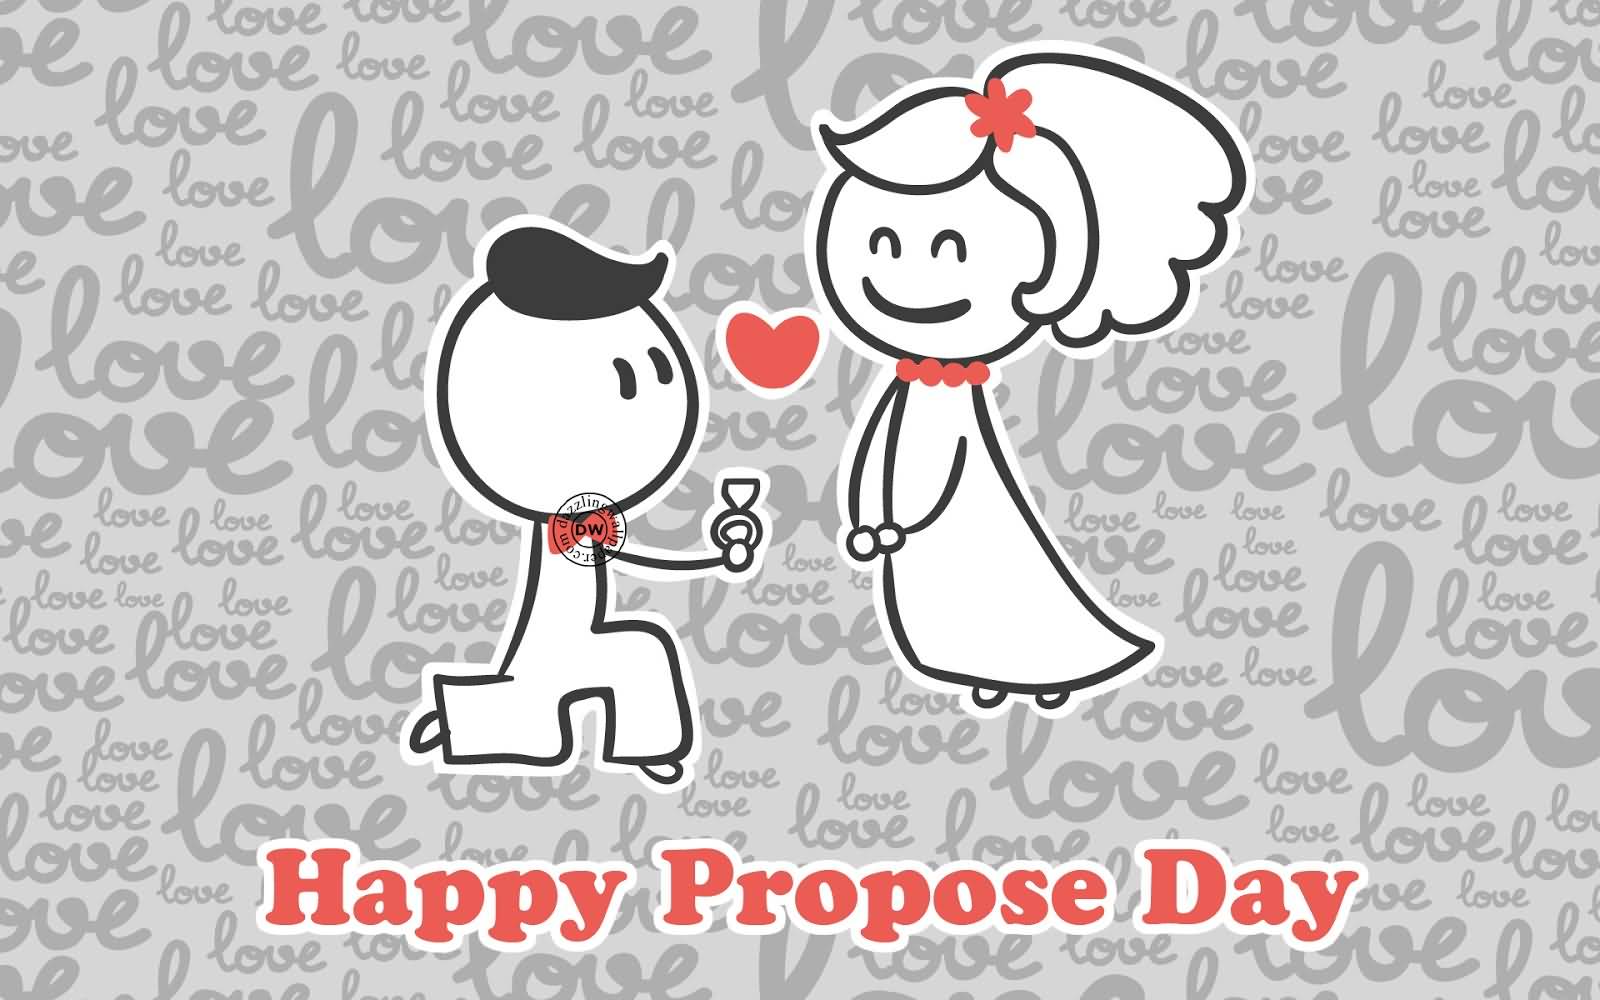 Happy Propose Day Cartoons Greeting Card